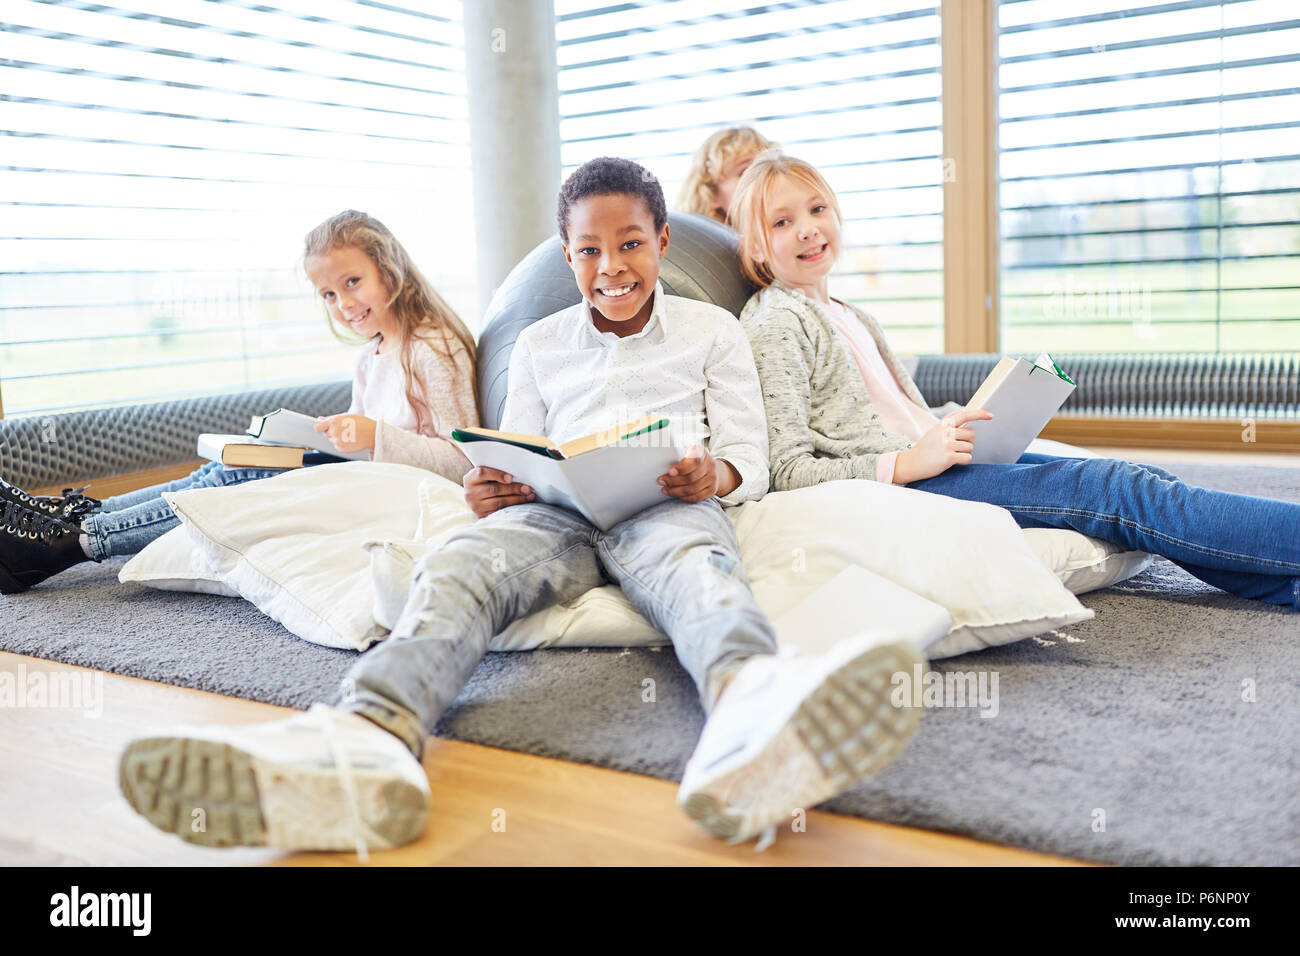 Group of kids of elementary school while reading relaxed in free time Stock Photo